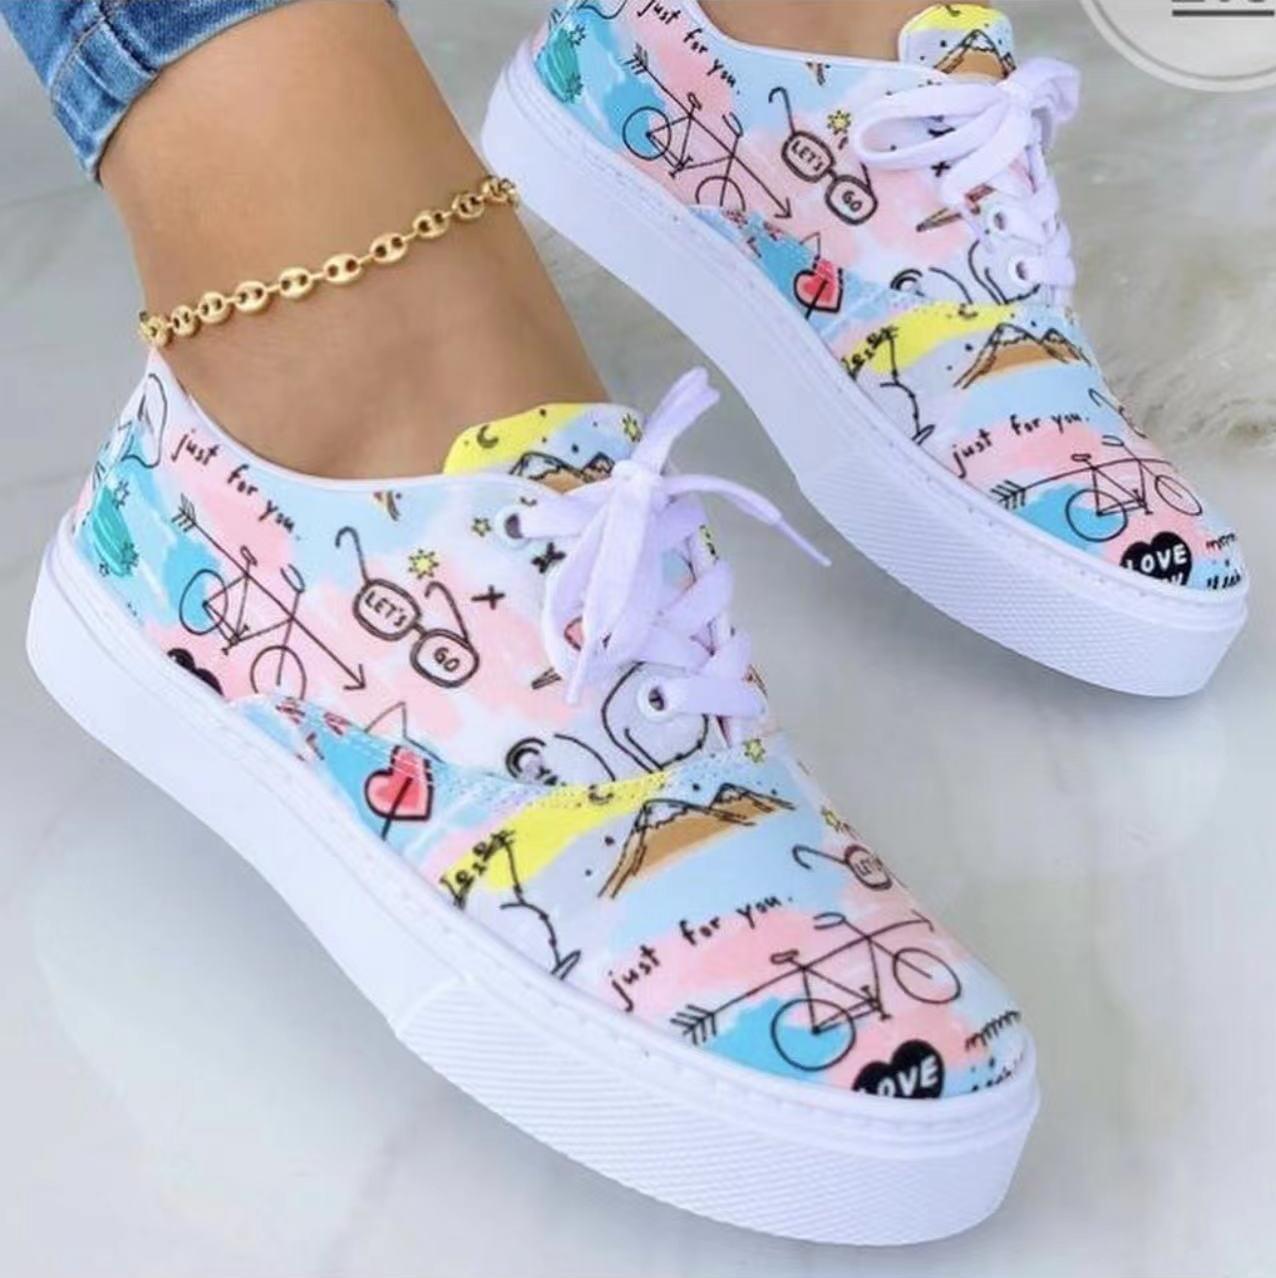 Lace-up Flats Shoes Print Canvas Fashion Walking Sneakers Women GlamzLife